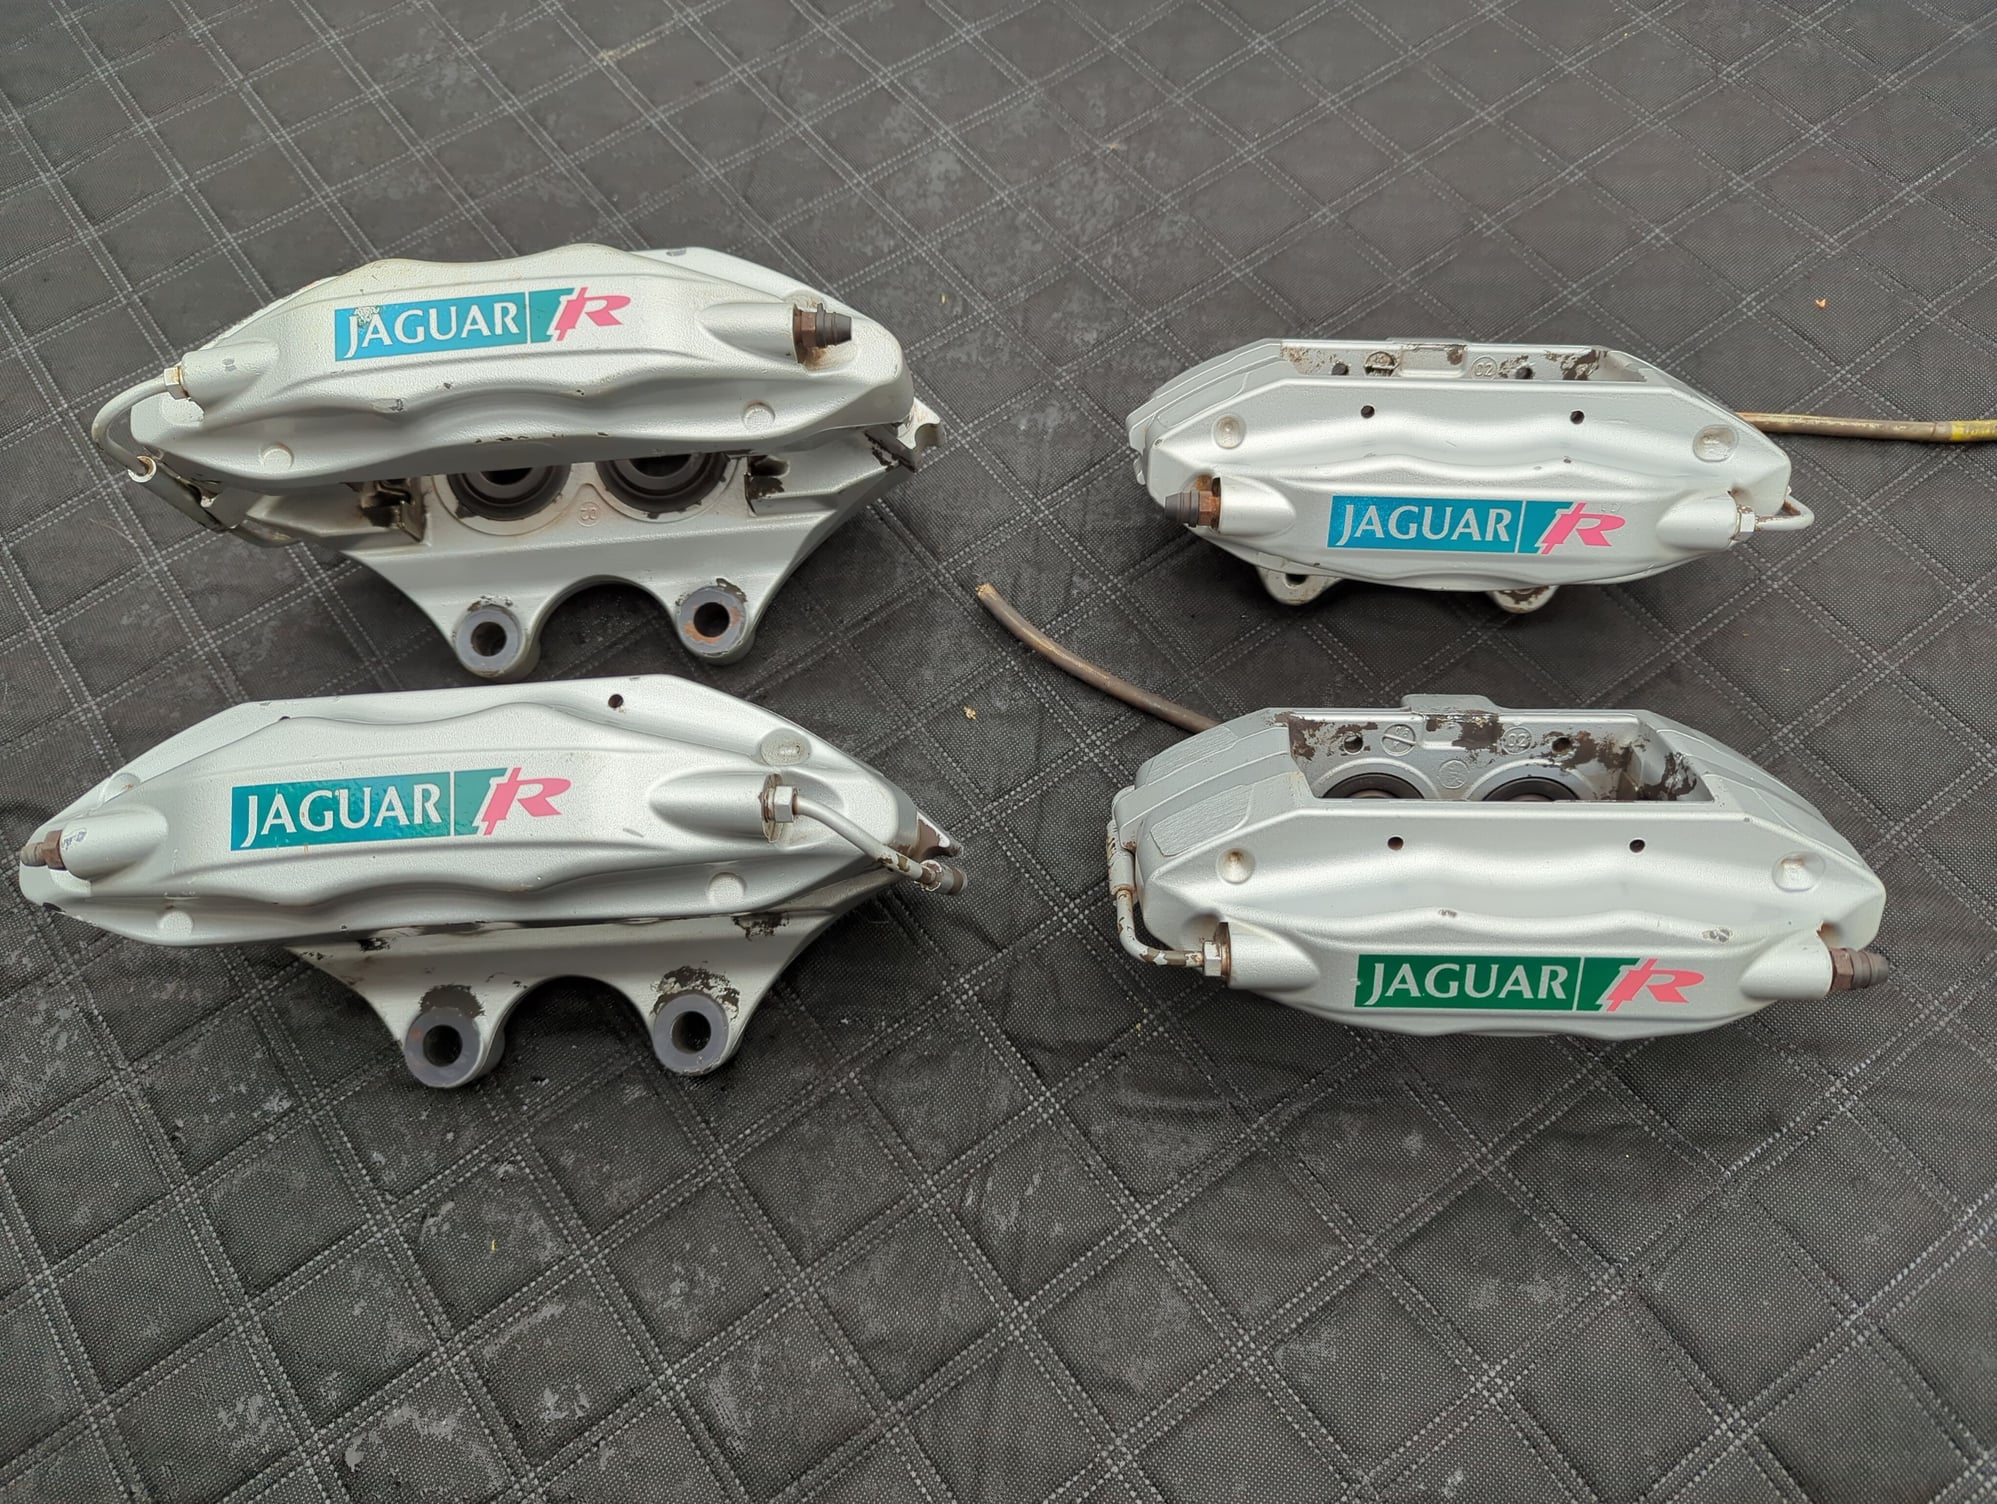 Brakes - For Sale 03-06 XKR Brembo calipers, same as R1 - Used - Churchville, NY 14428, United States